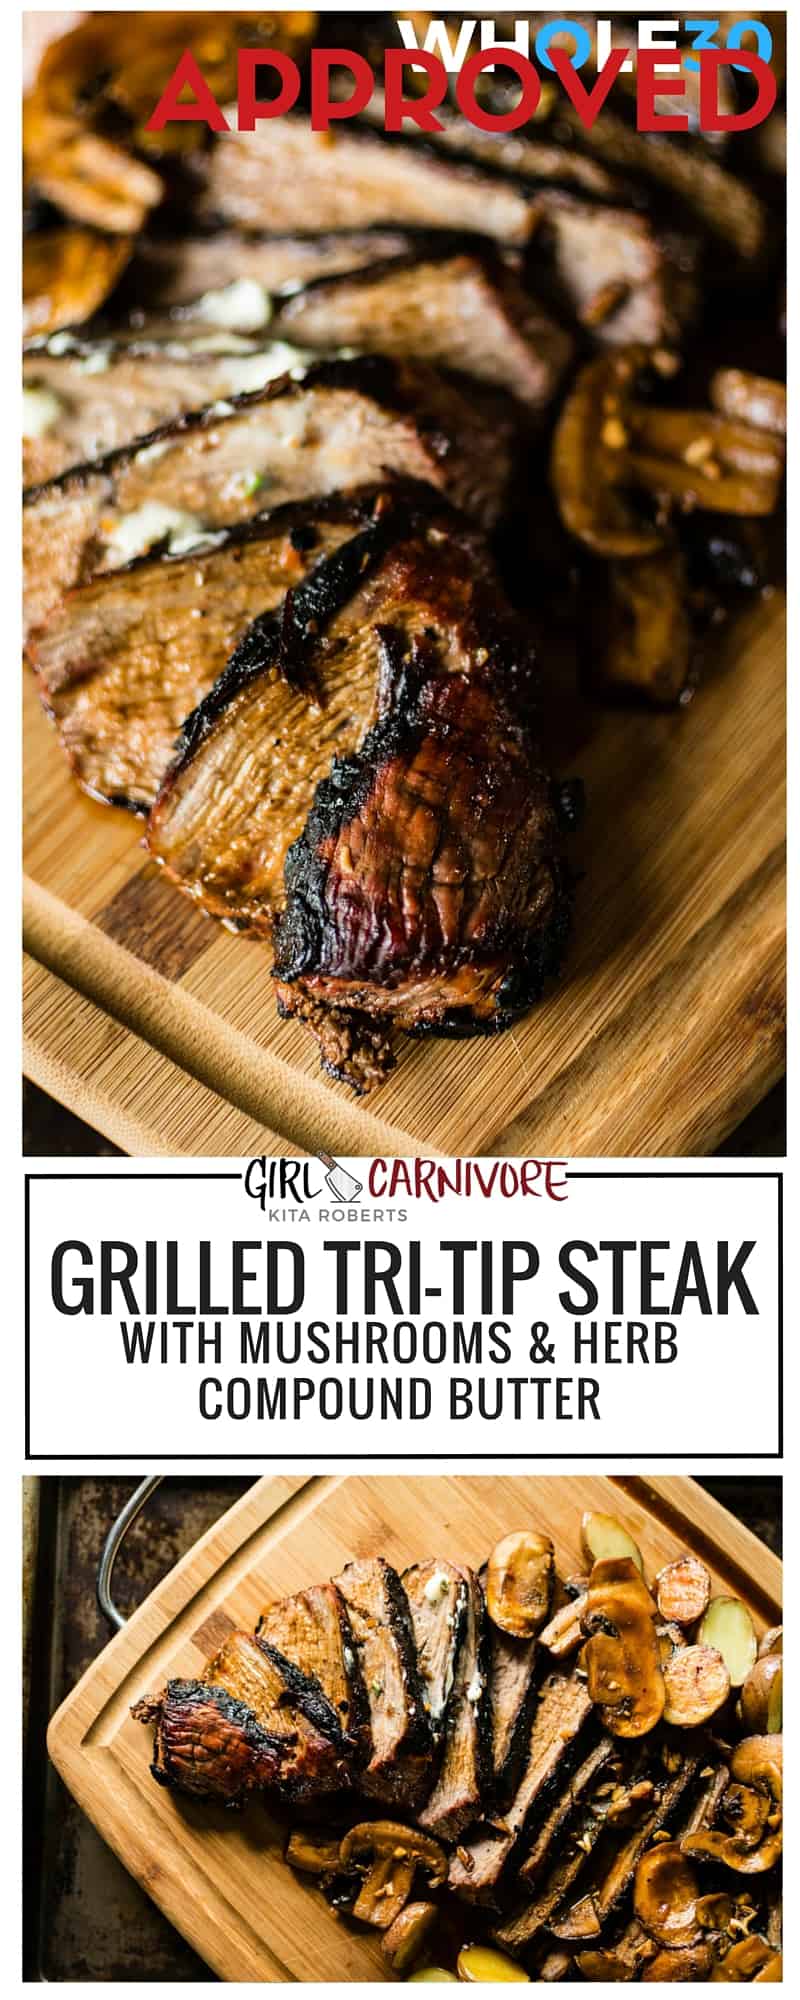 Whole30 Approved grilling all summer long! Grilled Tri-Tip Steak with Mushrooms and Herb Compound Butter